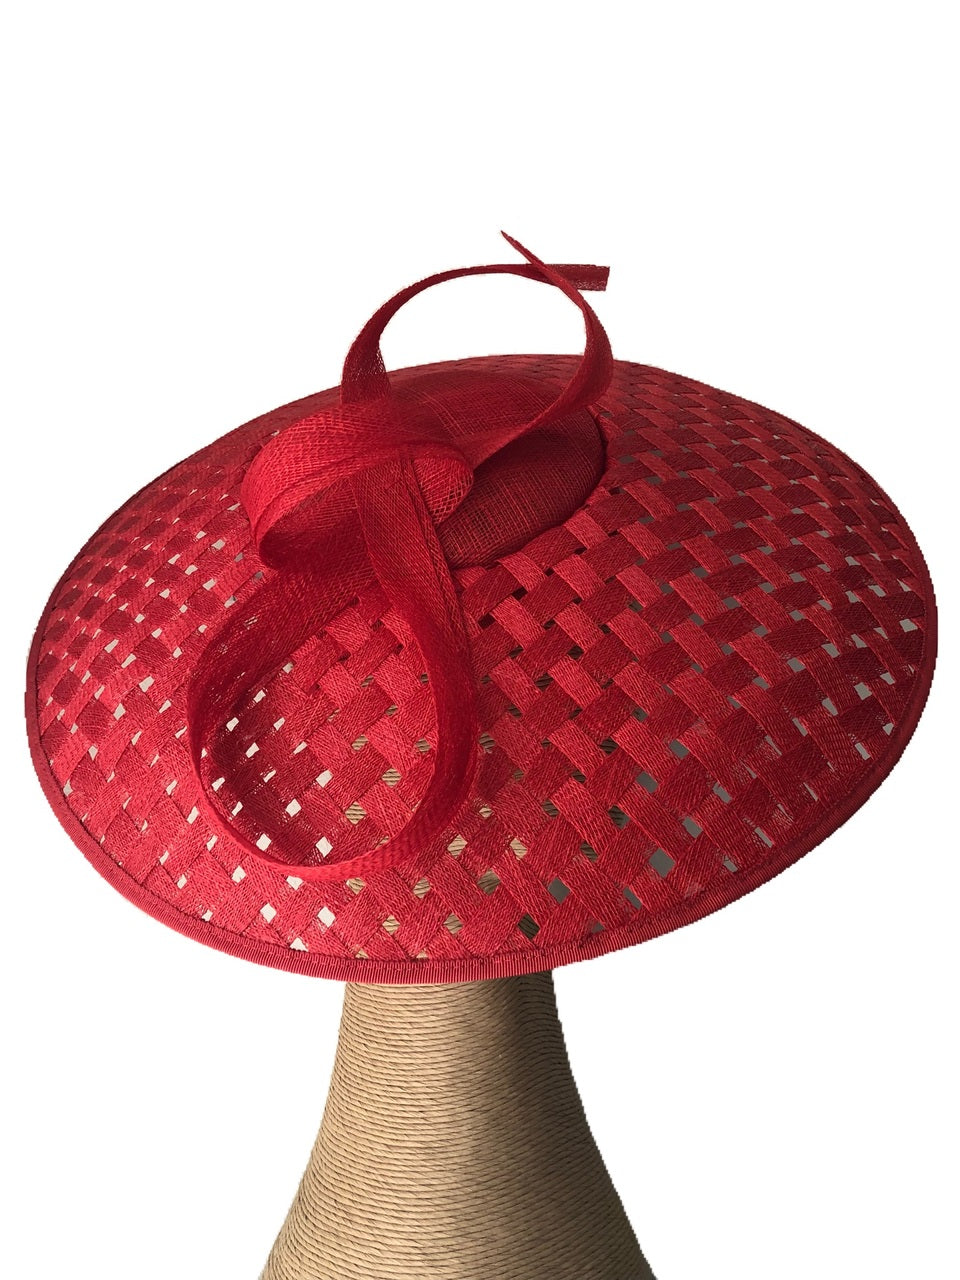 Fiona Powell Audrey Hat in Red on a Headband